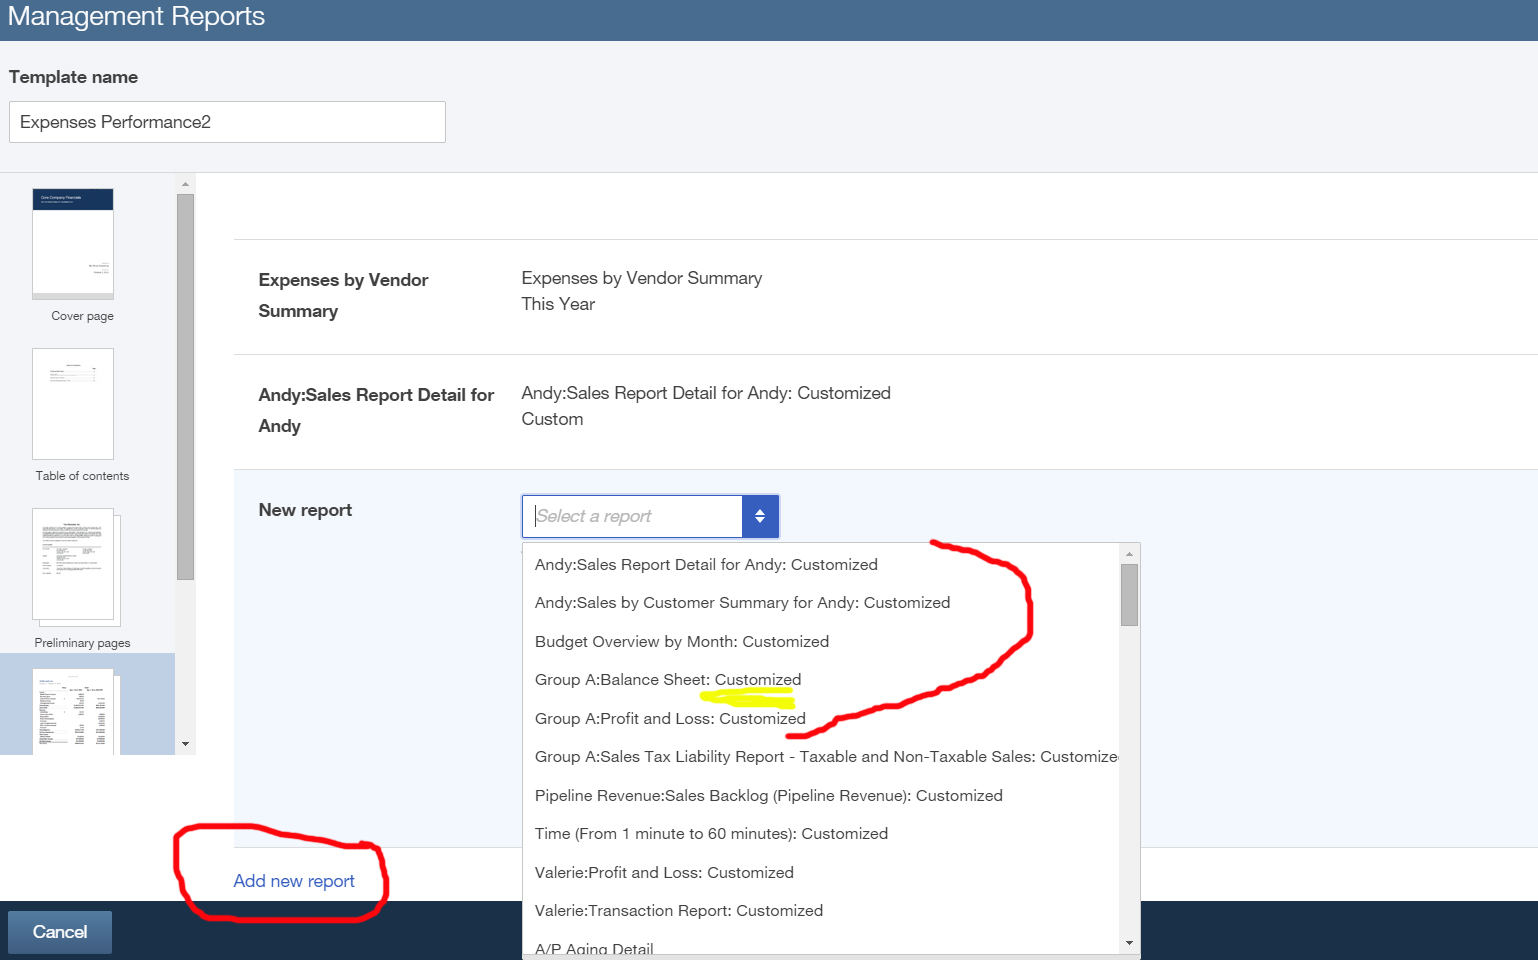 2 add customized report to mgmt report